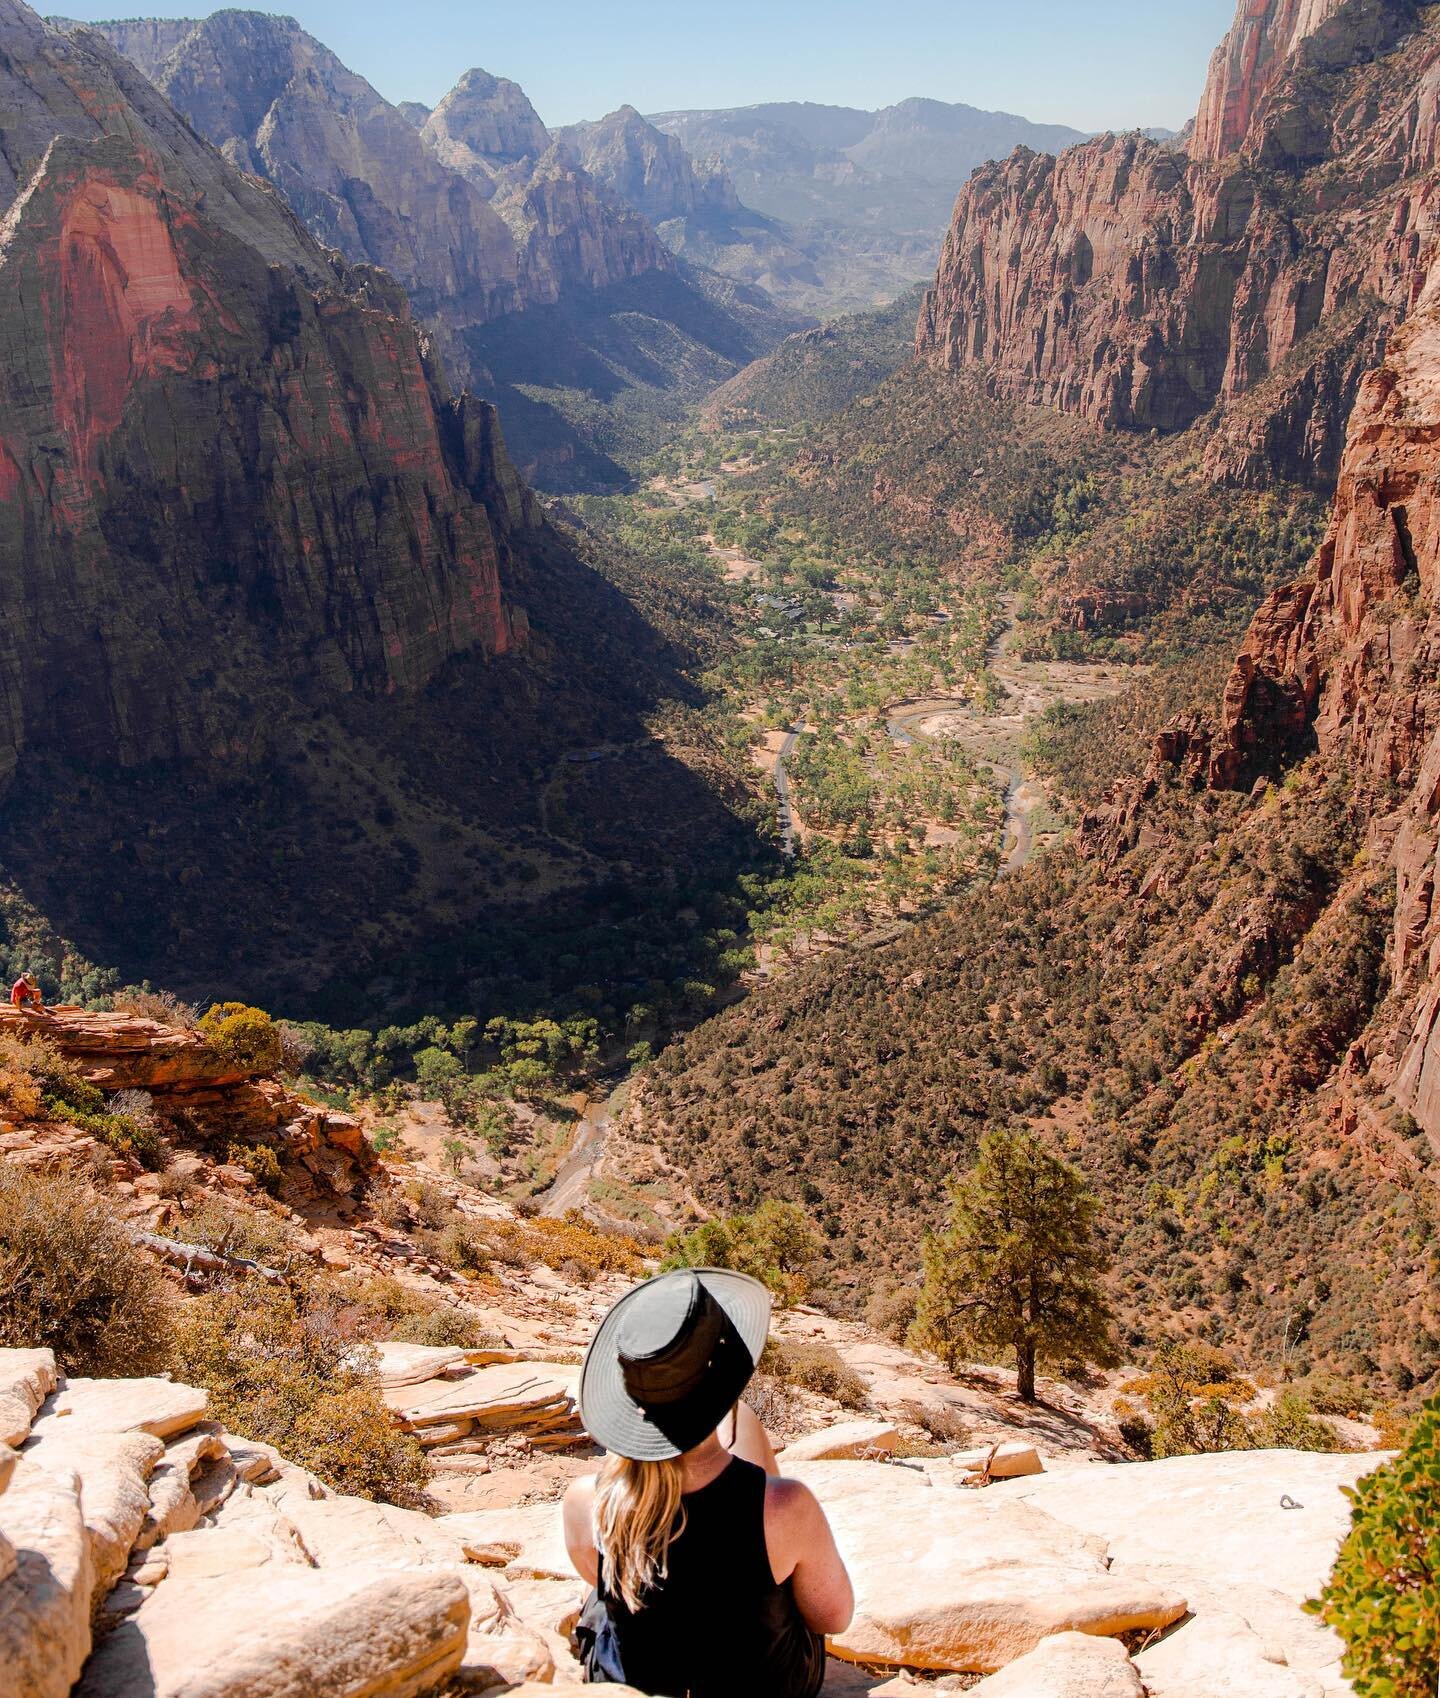 one of those can&rsquo;t-look-away kinda views 

#findyourpark #visualsoflife #stayandwander #ourplanetdaily #lonleyplanet #roamtheplanet #womenwhohike #voyaged #outdoortones #theoutbound #livetheadventure #hellofrom #zion #zionnationalpark #ZNP #ang